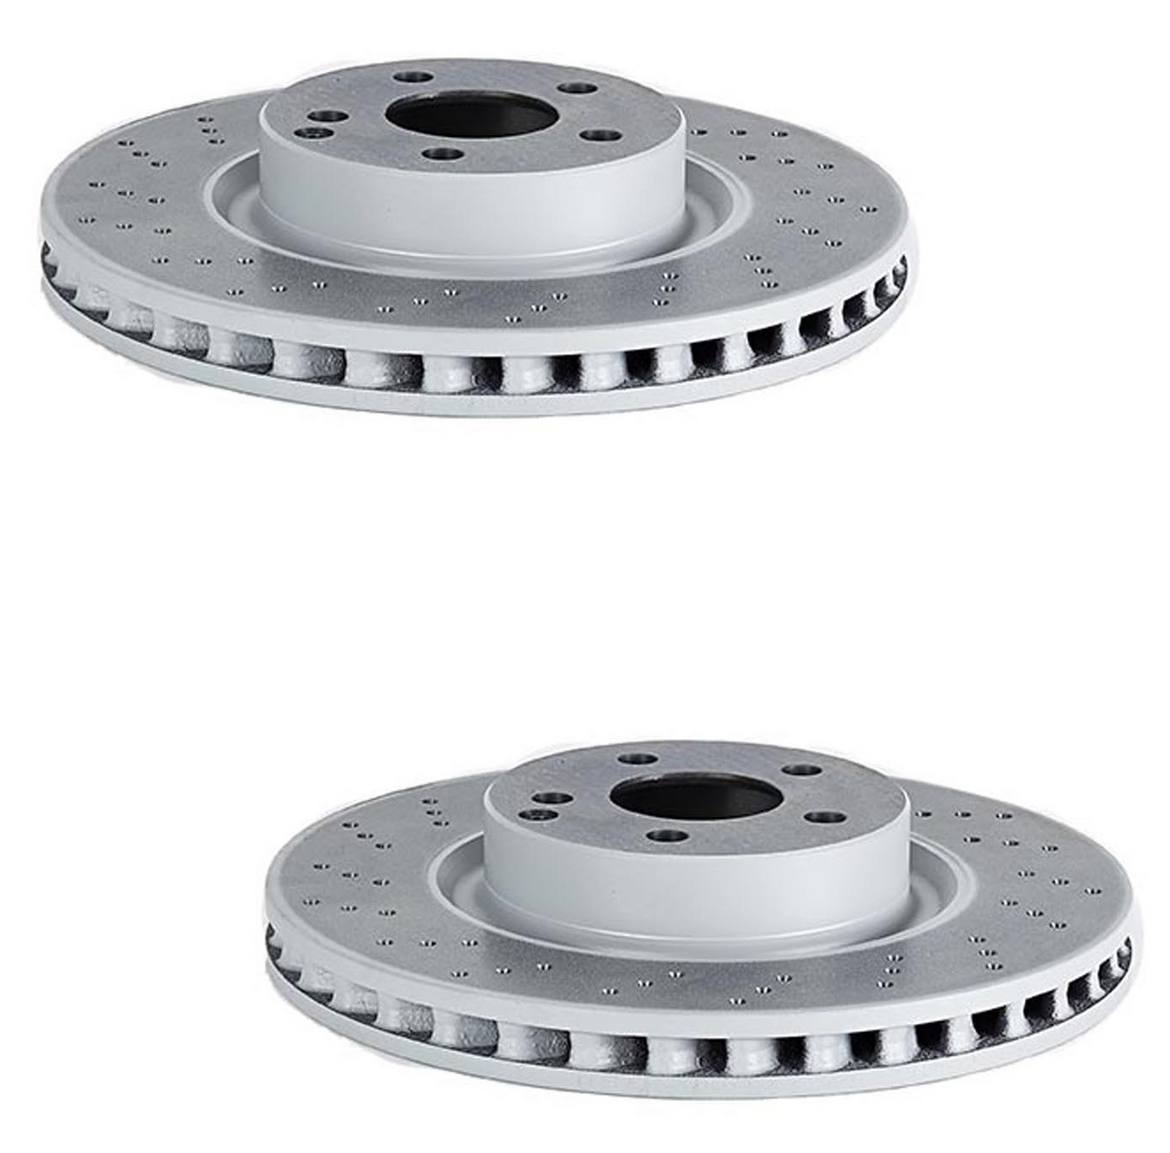 Mercedes Brakes Kit - Brembo Pads and Rotors Front (335mm) (Low-Met) 221421171207 - Brembo 1549232KIT